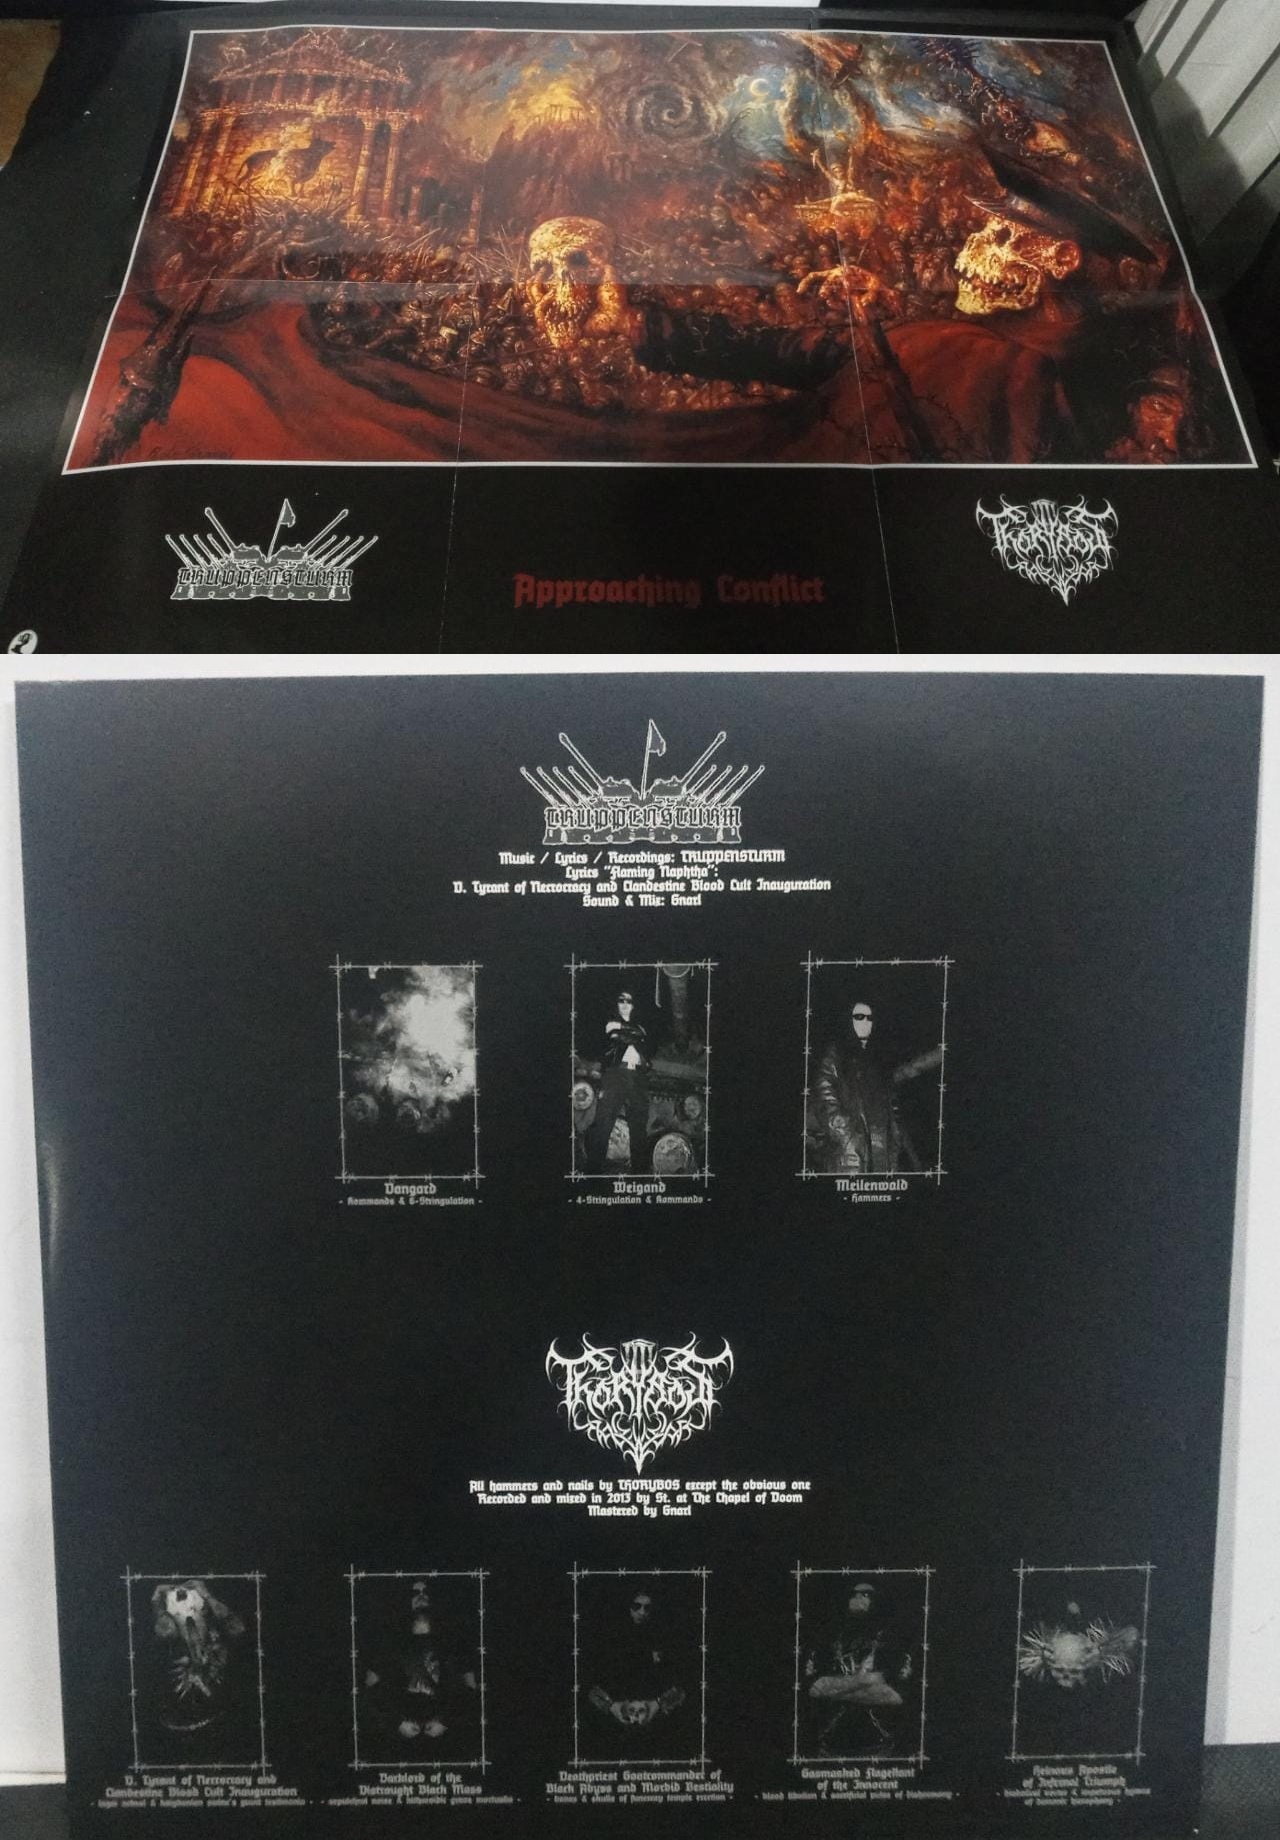 Vinil -  Truppensturm Thorybos - Approaching Conflict (Germany)